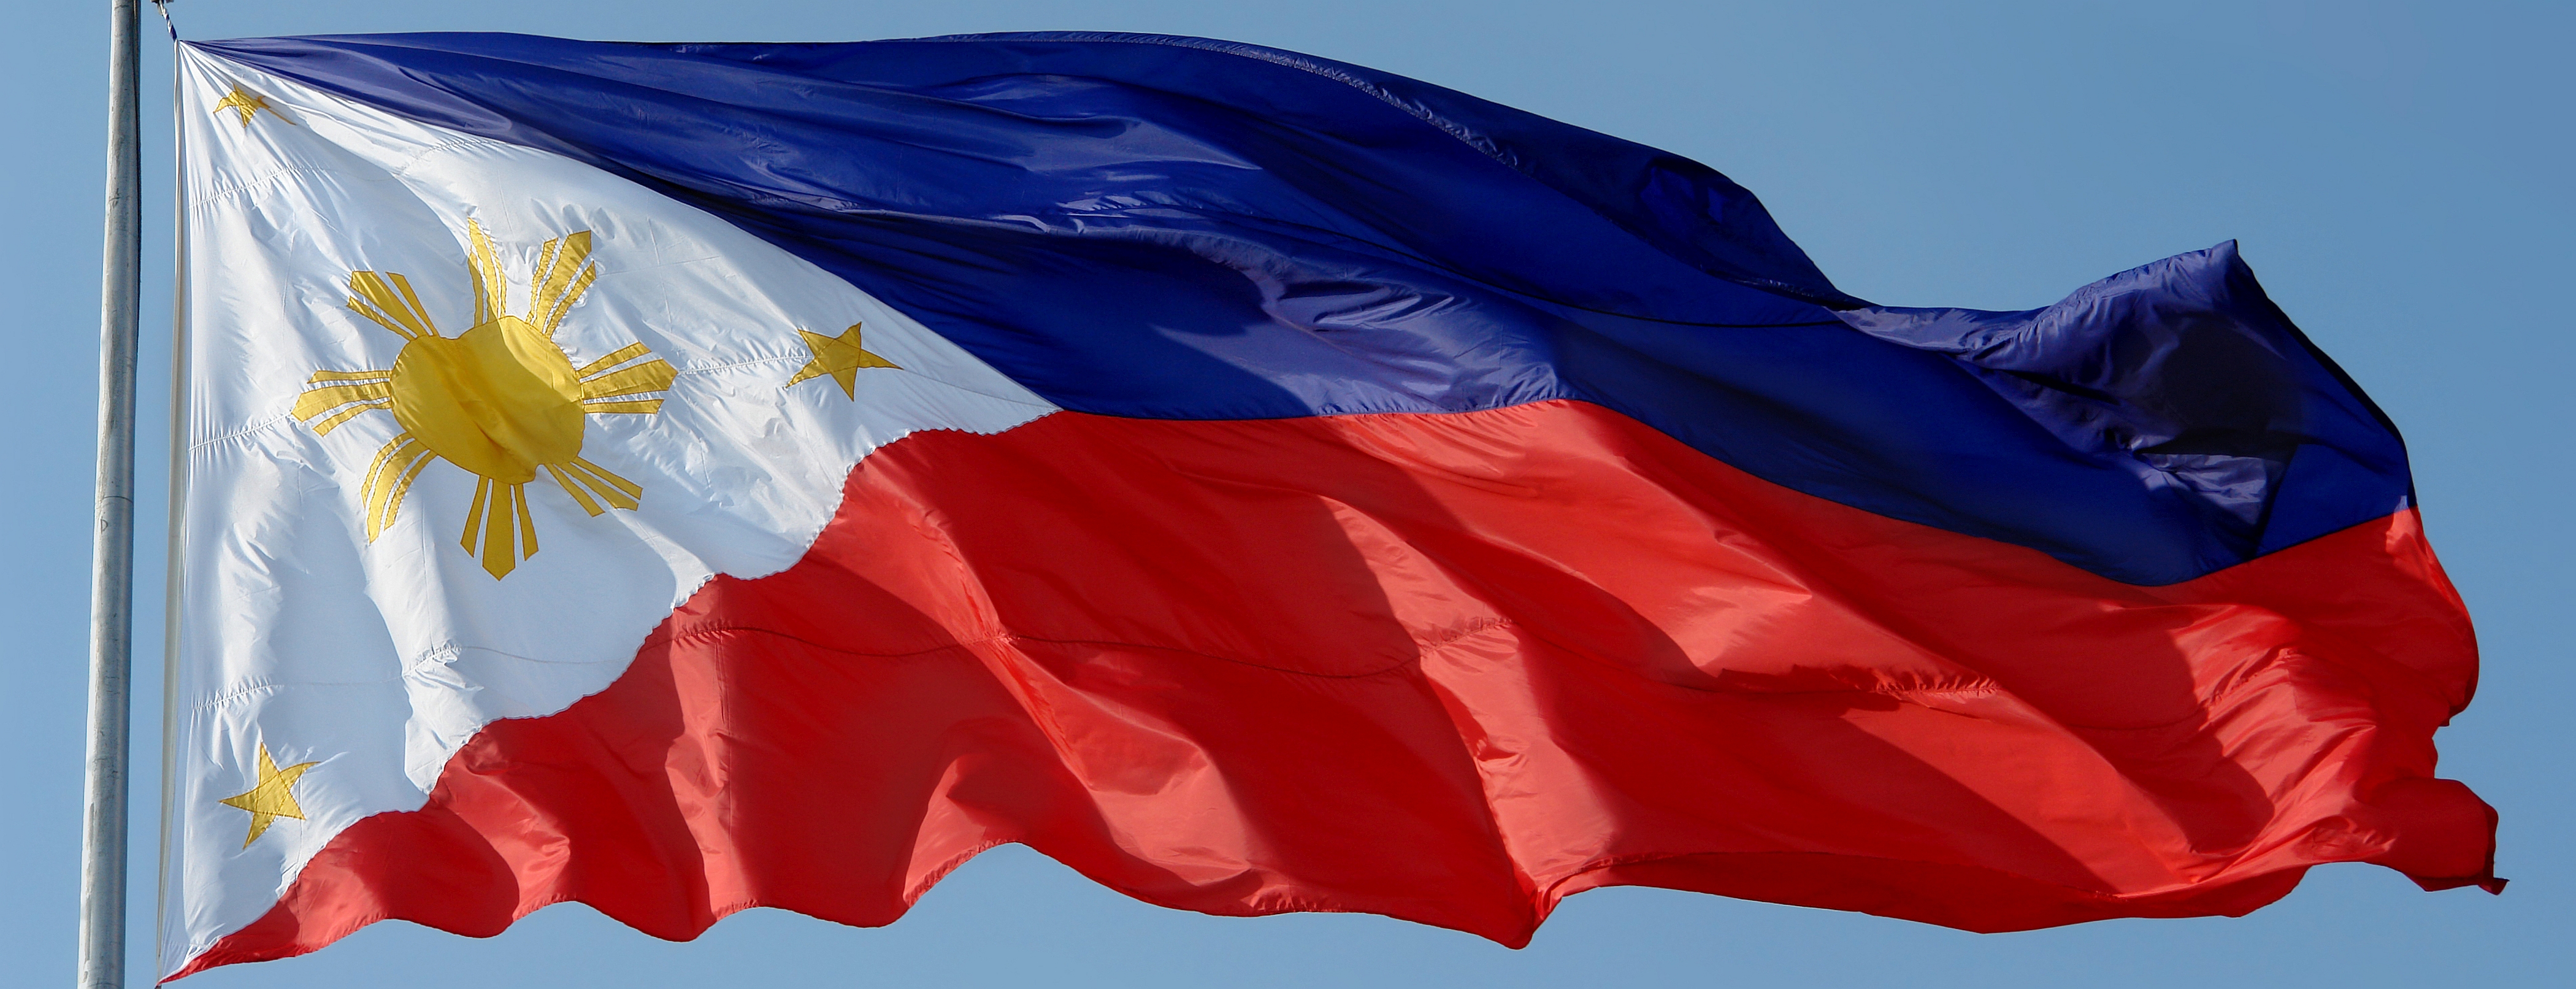 Misc Flag Of The Philippines HD Wallpaper | Background Image